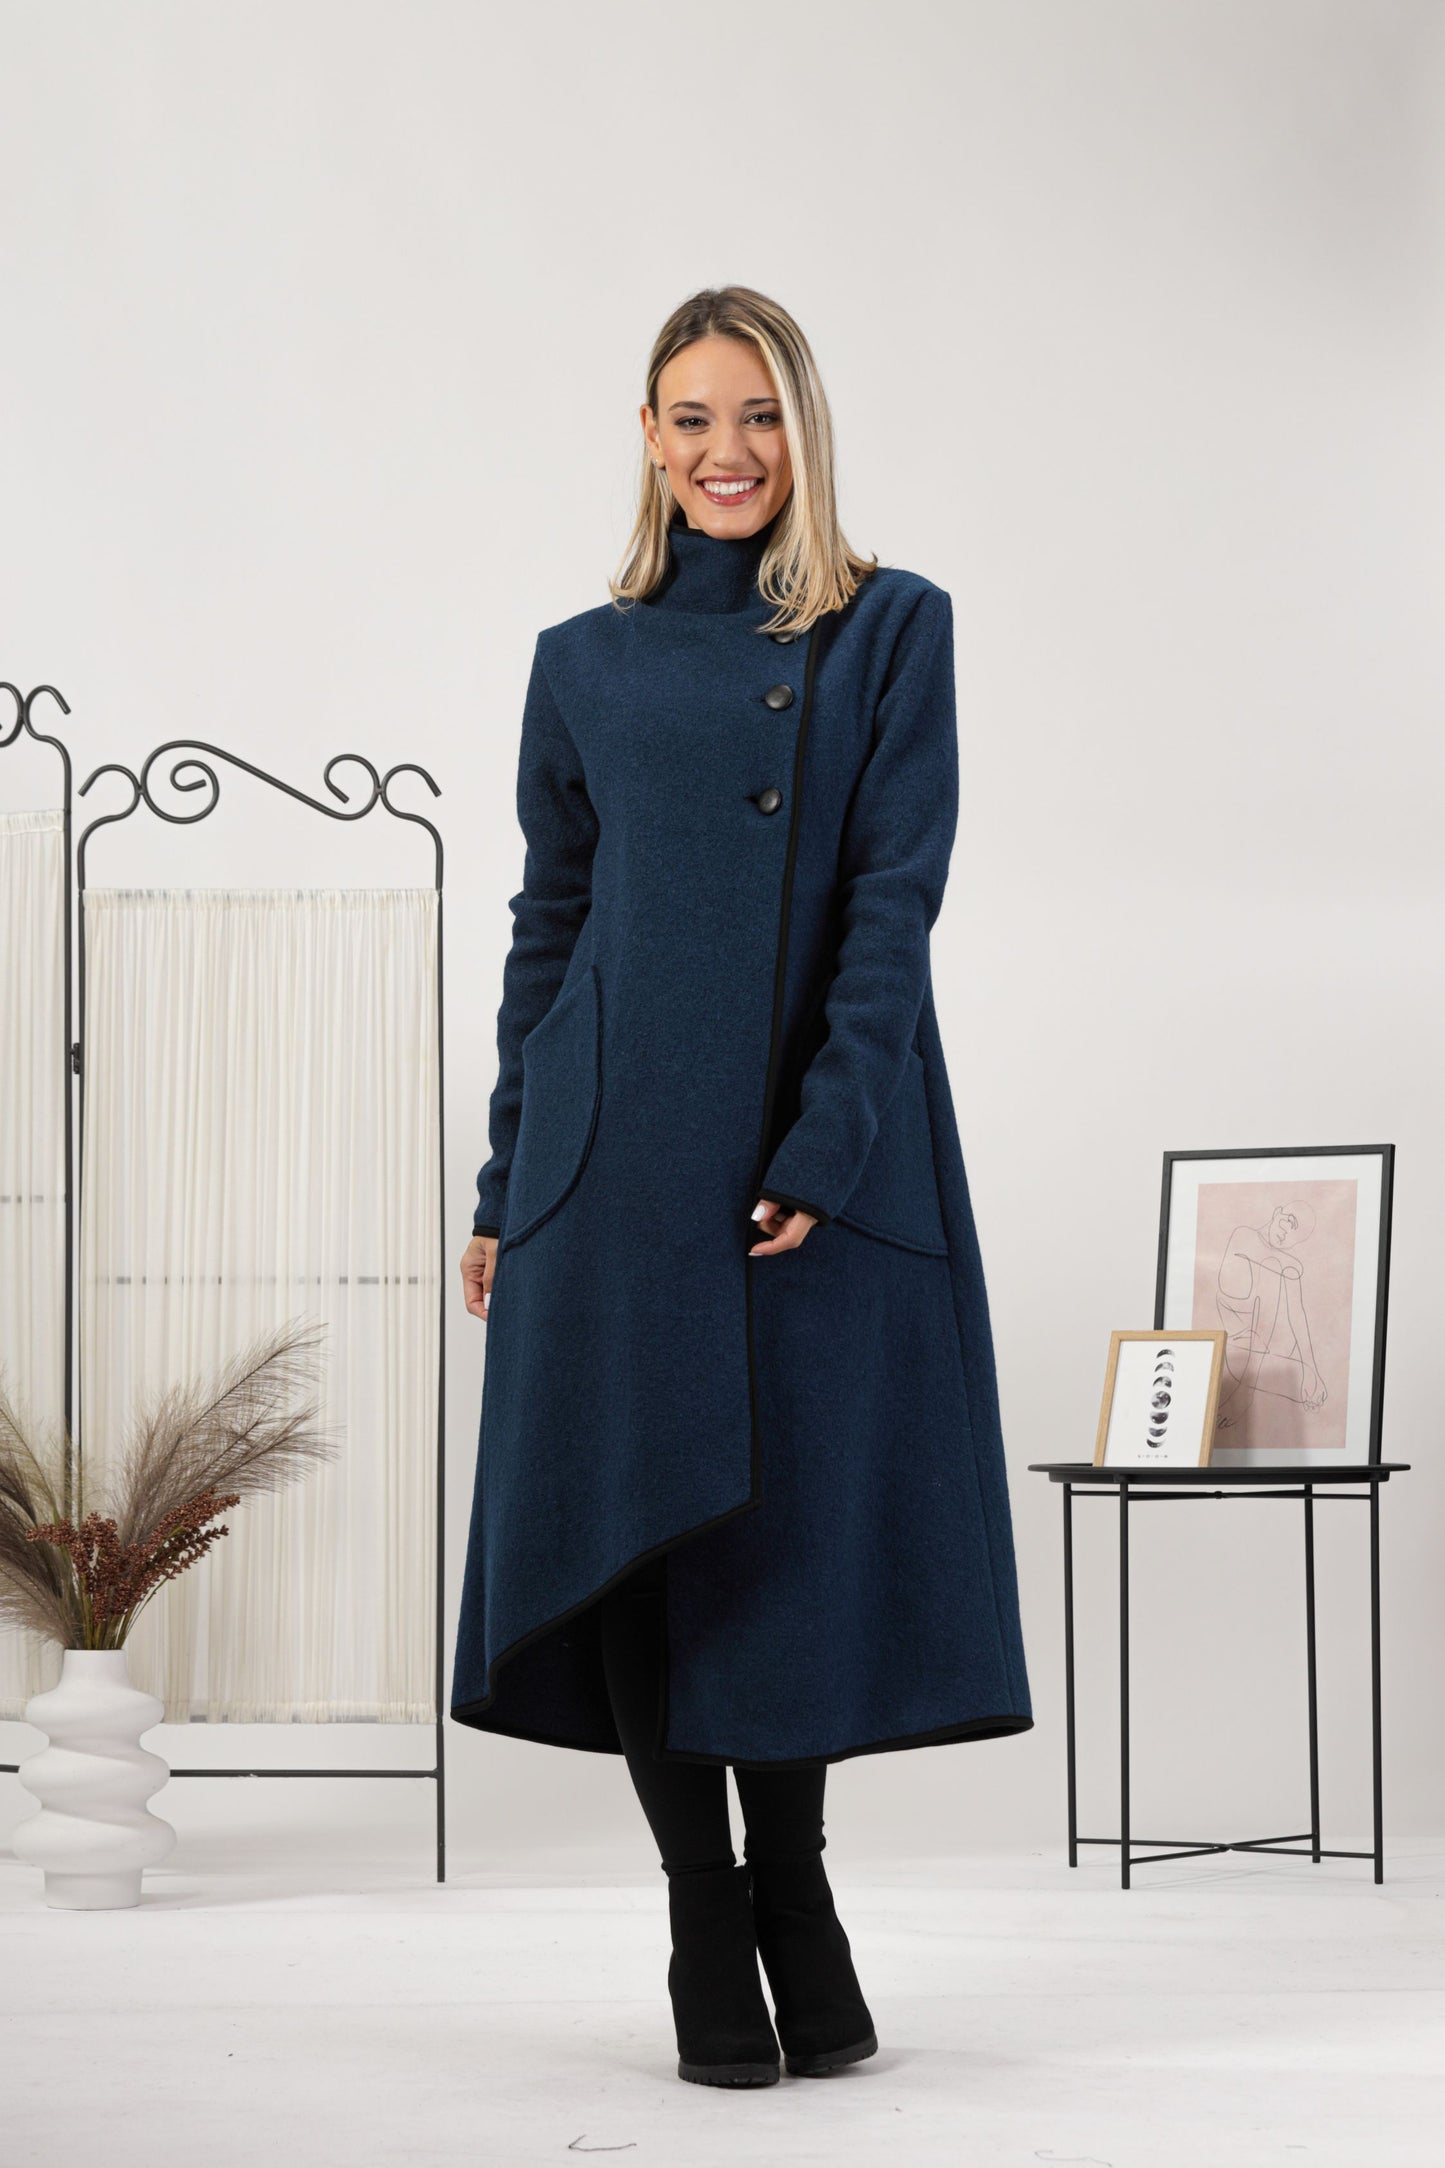 Elegant prussian blue boiled wool coat with pockets front the front view - from NikkaPlace | Effortless fashion for easy living